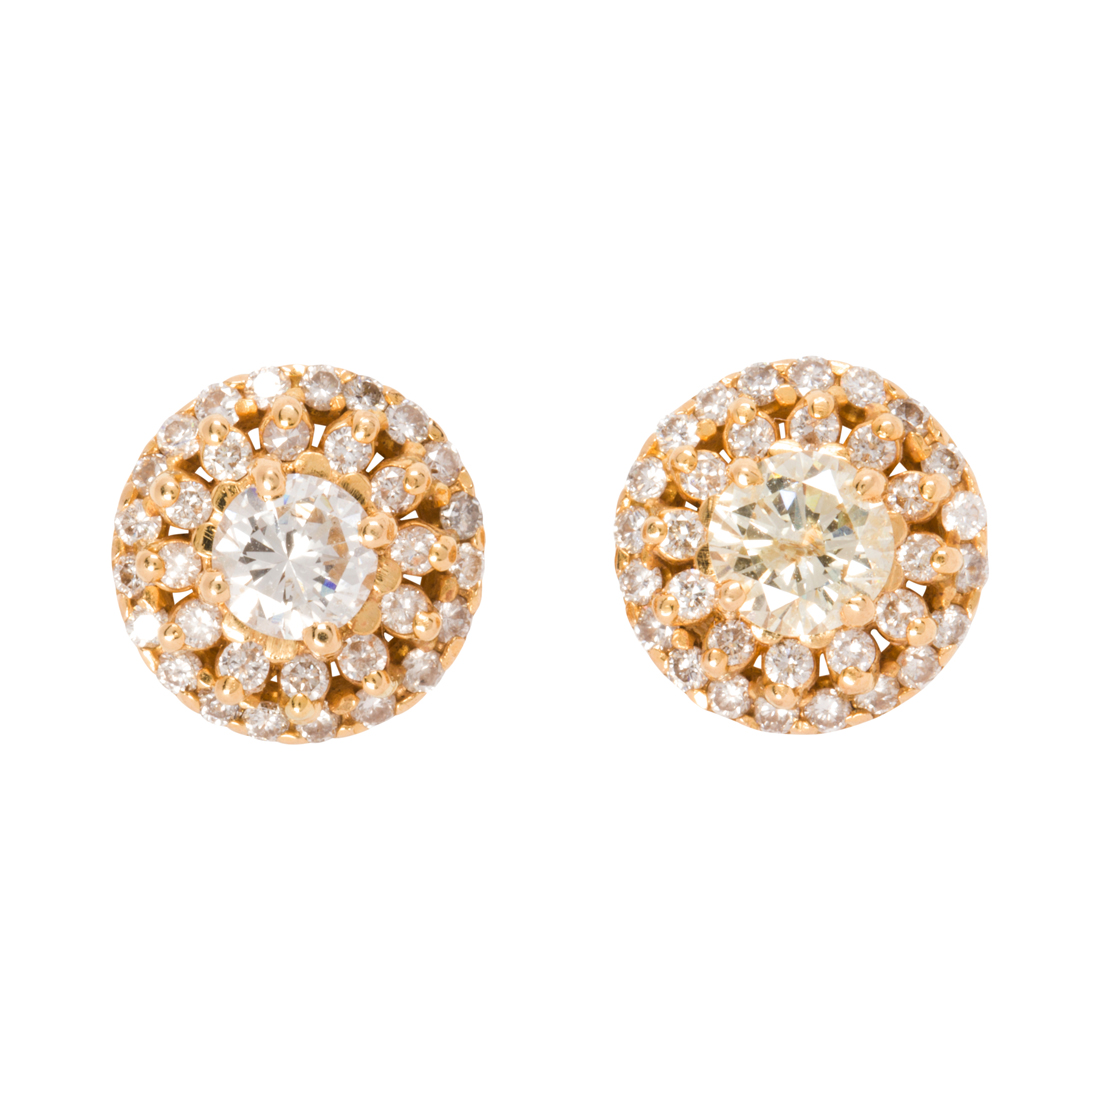 A PAIR OF DIAMOND AND 14K GOLD 3cde80